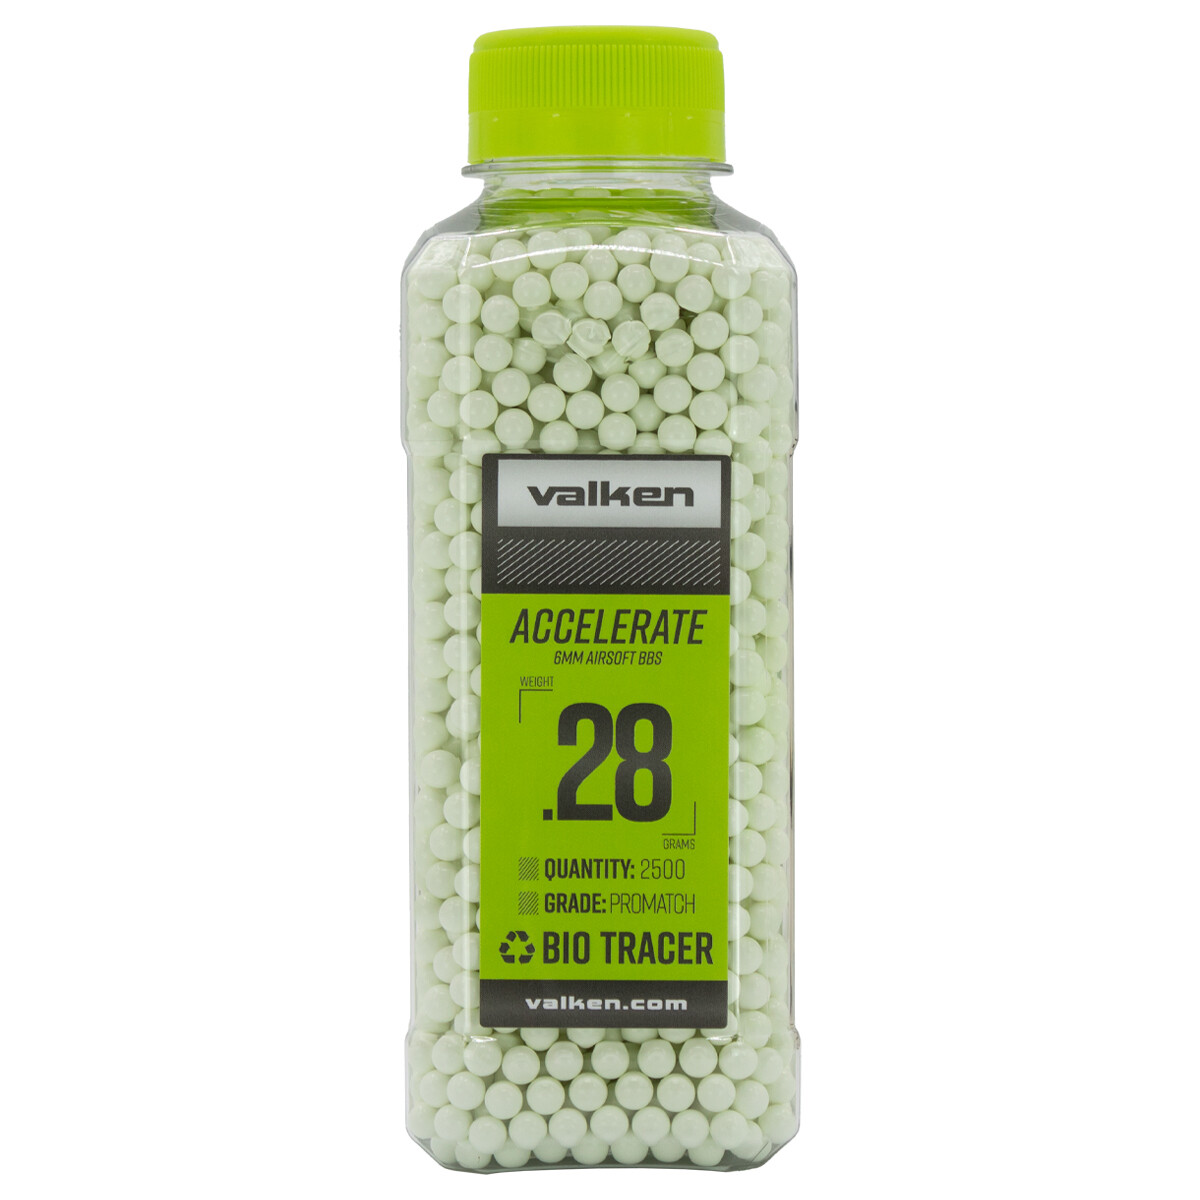 Valken Accelerate .28g Biodegradable Tracer BBs (2500 count)